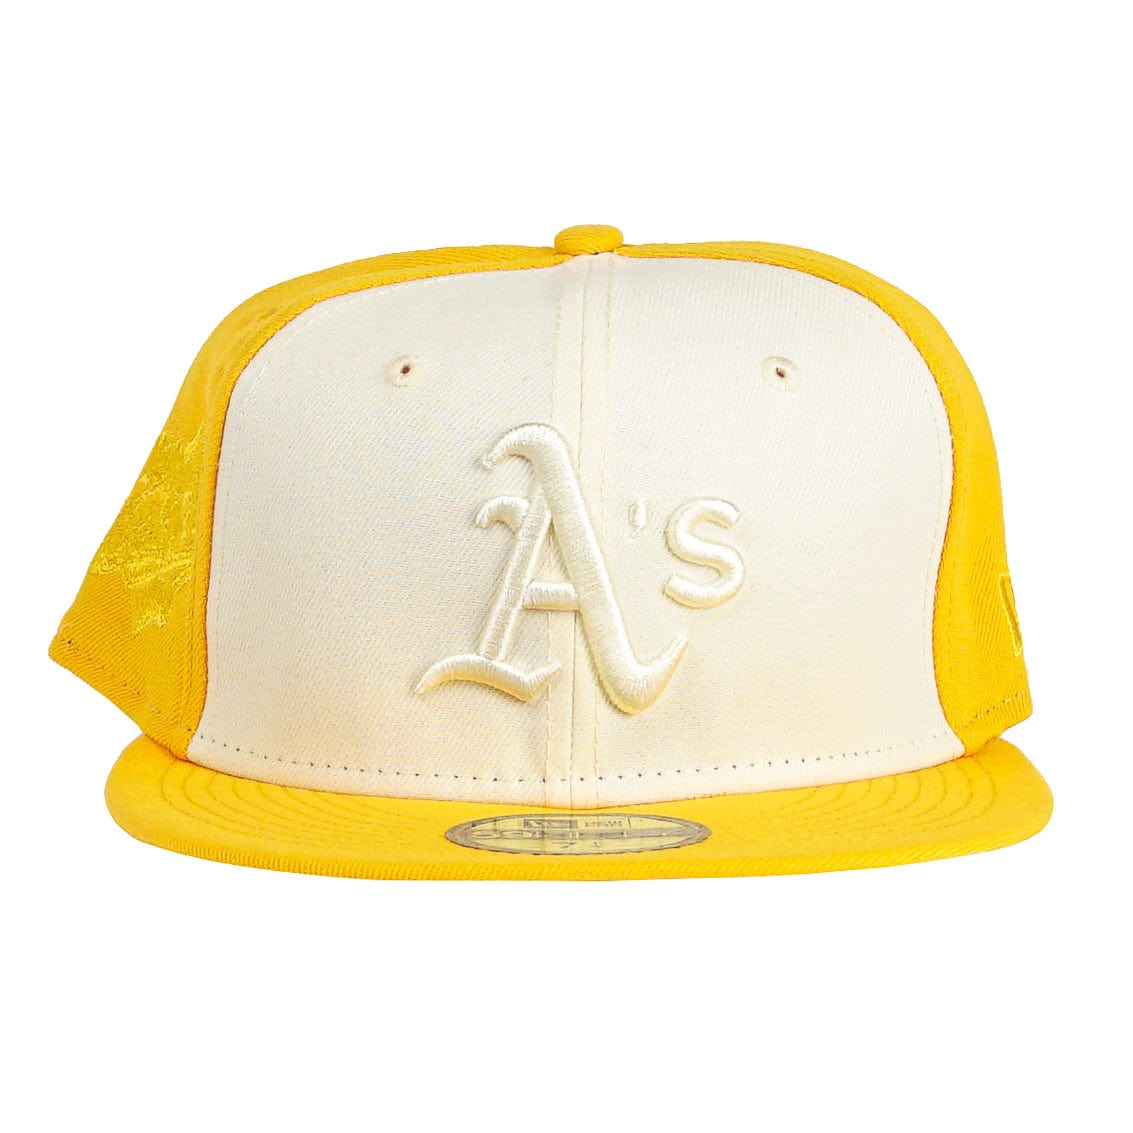 Oakland Athletics Tonal 2-Tone 59Fifty Fitted Hat in yellow and cream - New Era - State Of Flux